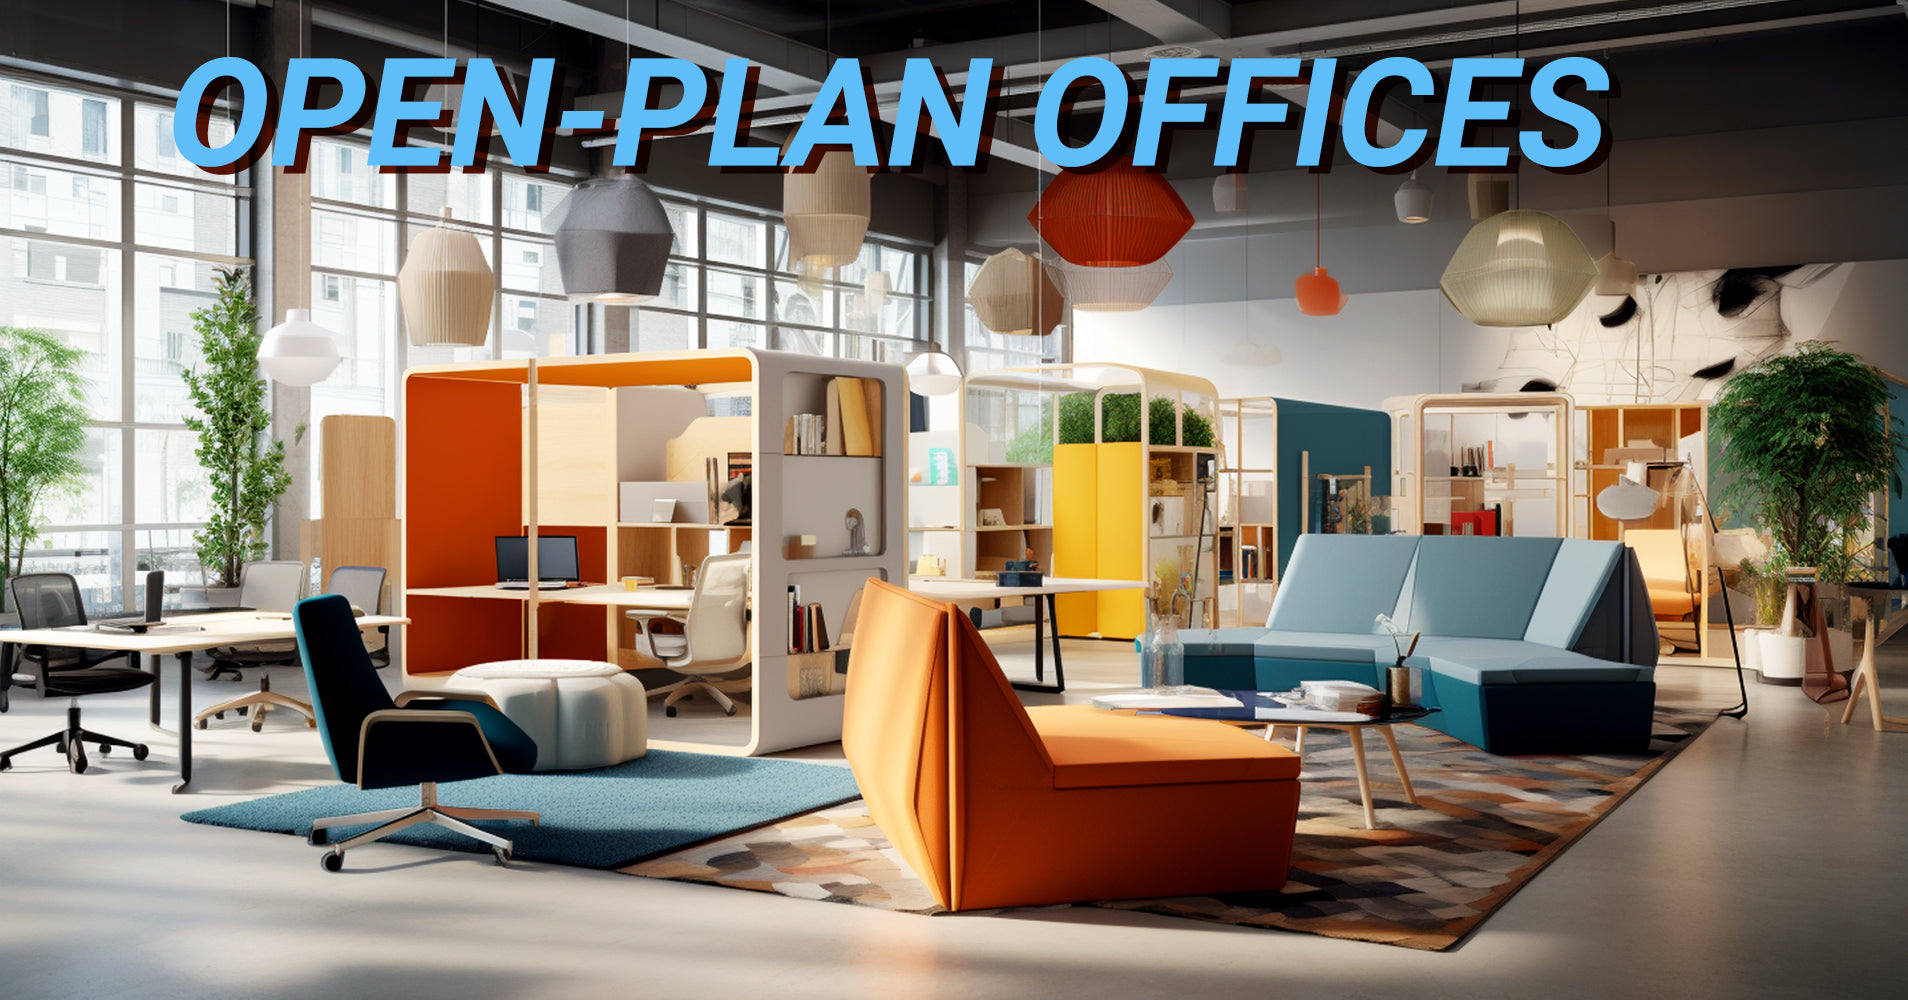 Spacious contemporary office space featuring a variety of seating options, from teal sofas to orange lounge chairs.